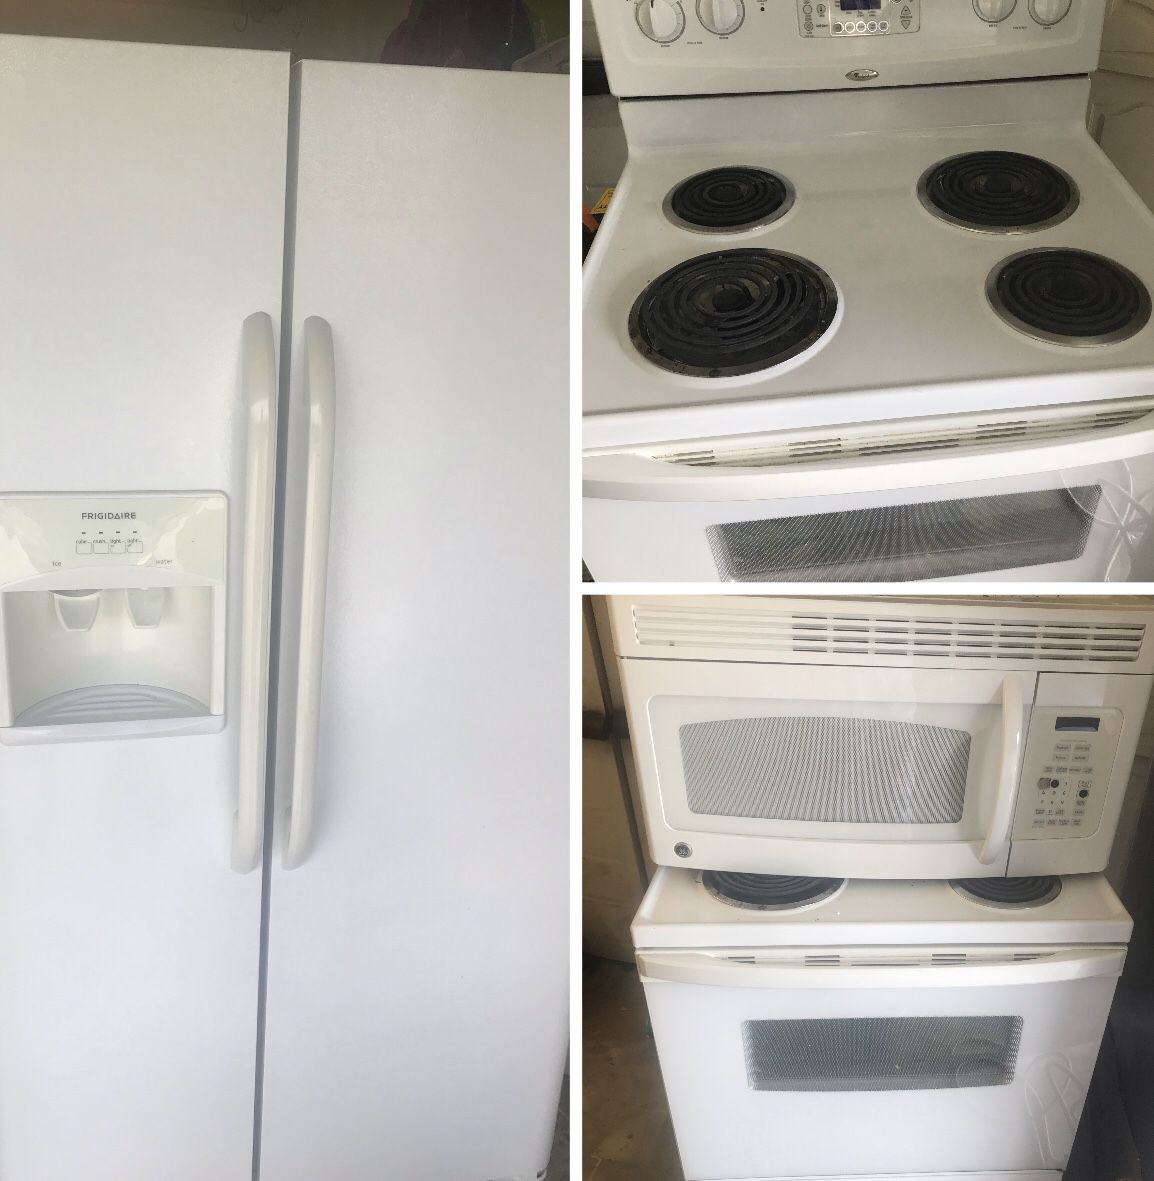 Frigidaire "stove,over the range microwave and fridge everything works fine!!